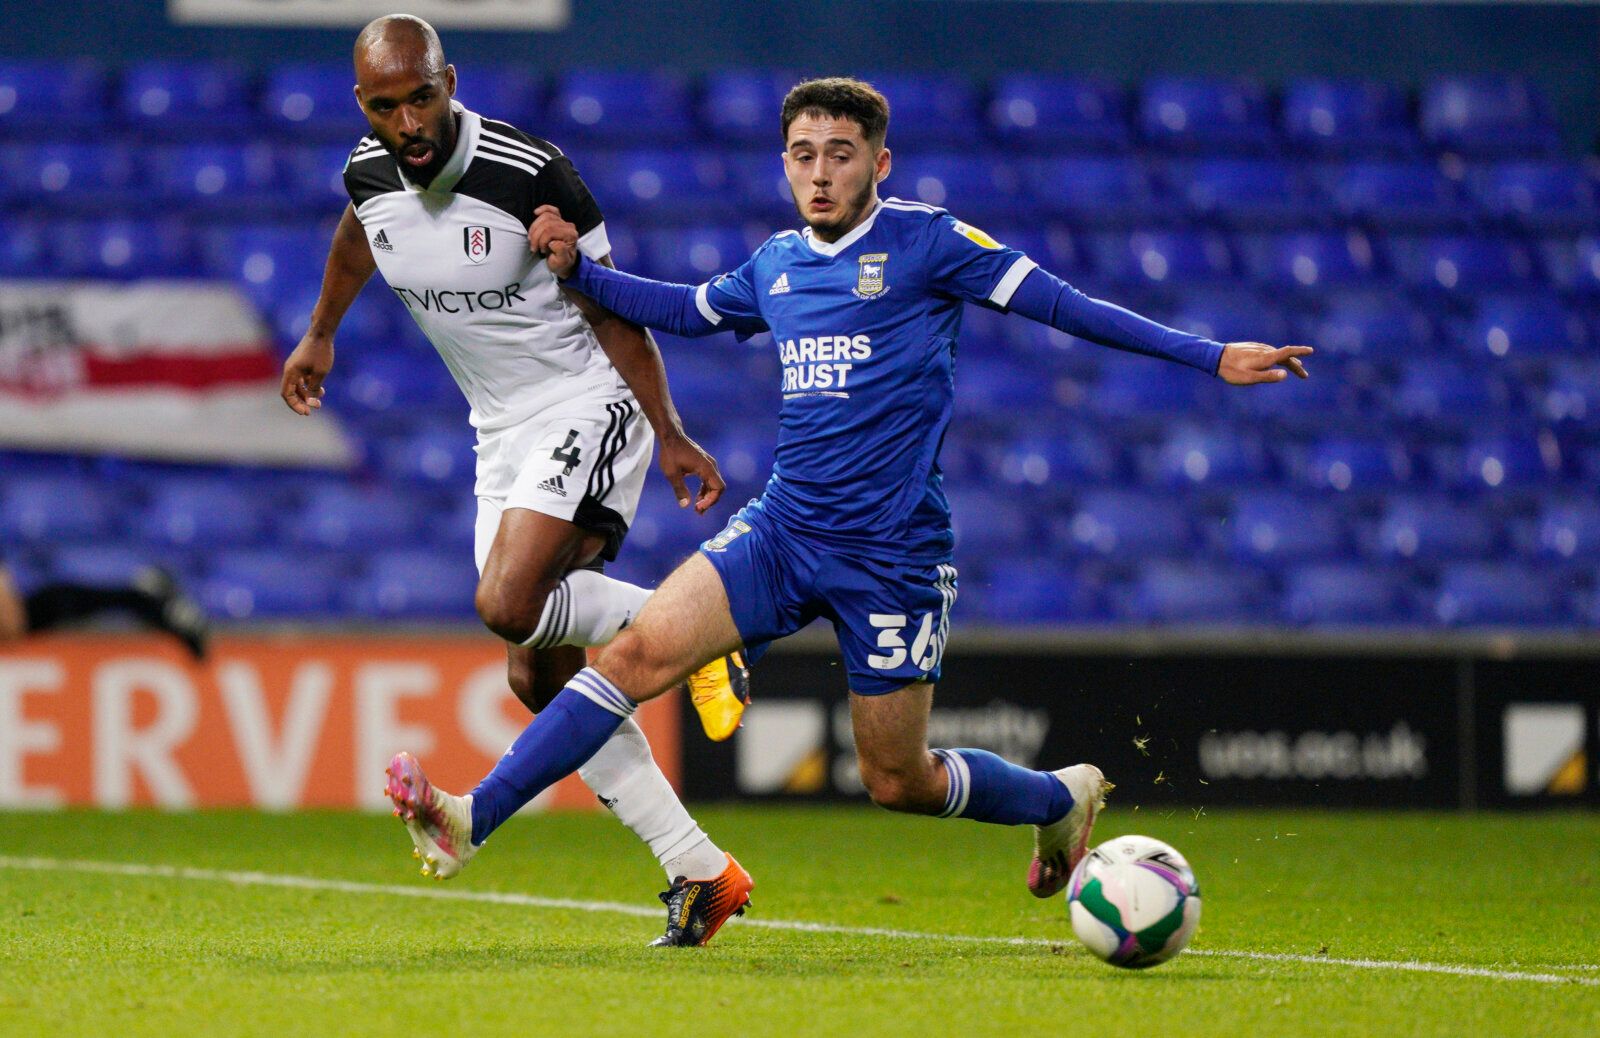 Soccer Football - Carabao Cup Second Round - Ipswich Town v Fulham - Portman Road, Ipswich, Britain - September 16, 2020. Fulham's Denis Odoi in action with Ipswich Town's Armando Dobra Pool via REUTERS/Will Oliver EDITORIAL USE ONLY. No use with unauthorized audio, video, data, fixture lists, club/league logos or 'live' services. Online in-match use limited to 75 images, no video emulation. No use in betting, games or single club/league/player publications.  Please contact your account represen